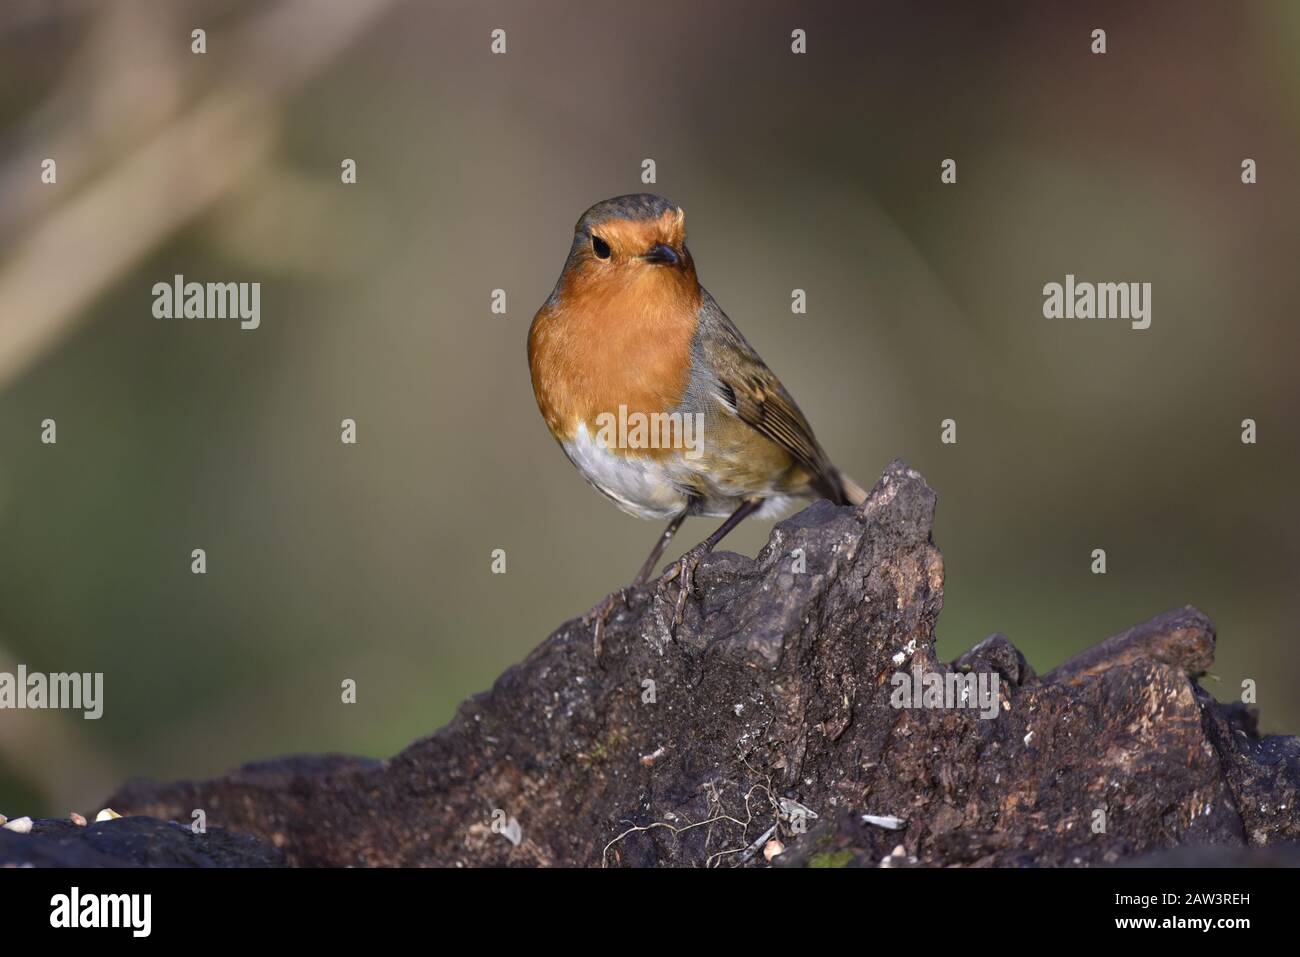 European Robin Erithacus rubecula Perched on Log Facing Camera in Winter Stock Photo